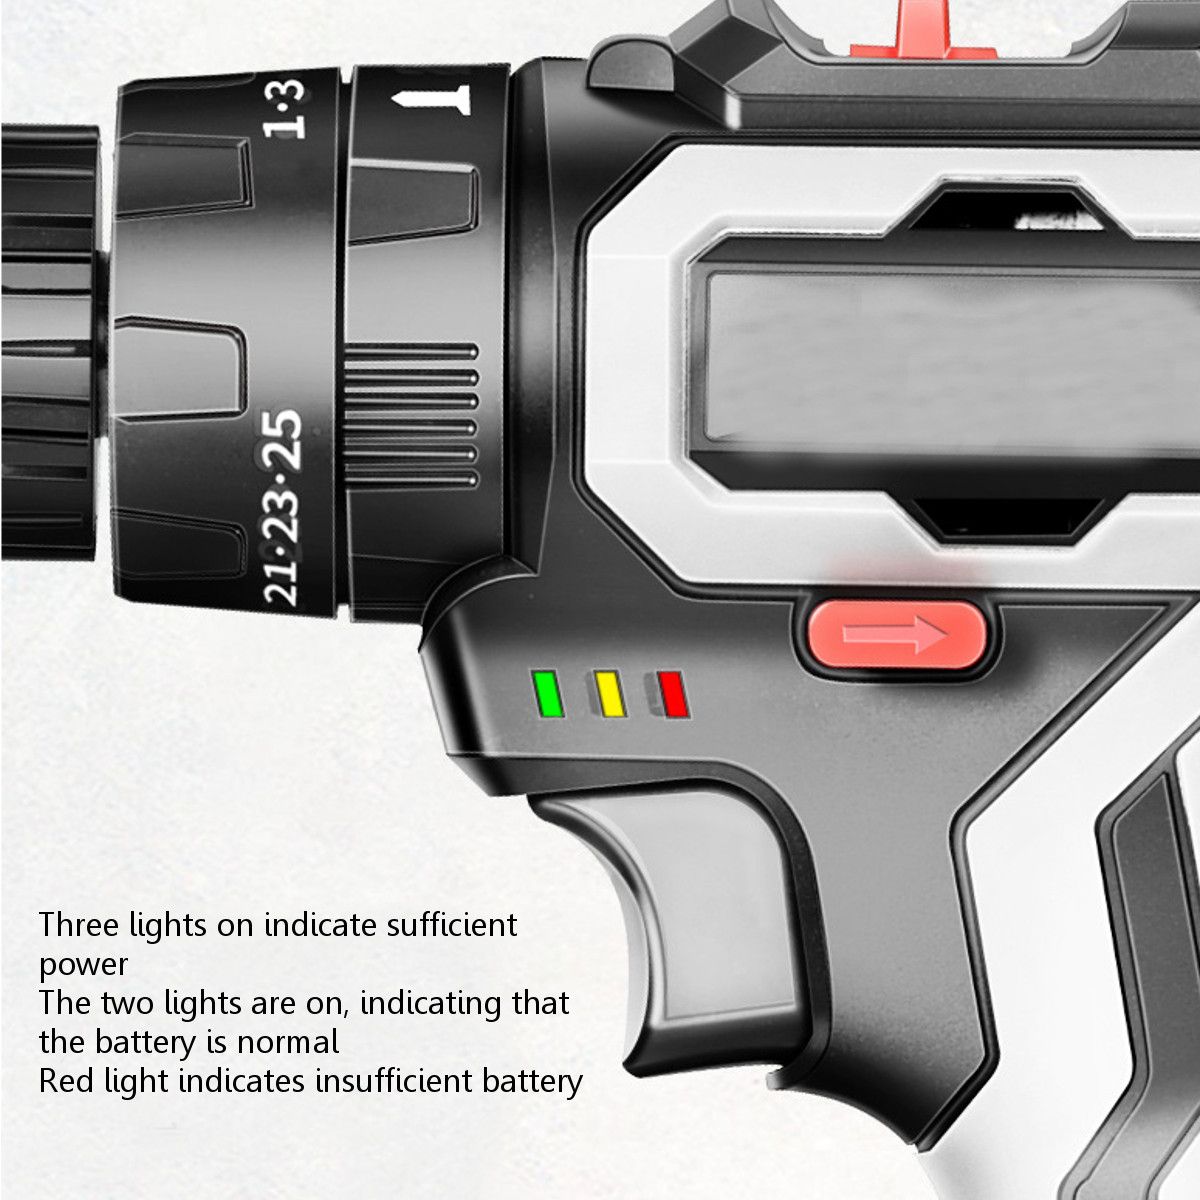 12V-1500mAH-25NM-Rechargeable-Cordless-Drill-2-Speeds-Electric-Screwdriver-Power-Tool-1736770